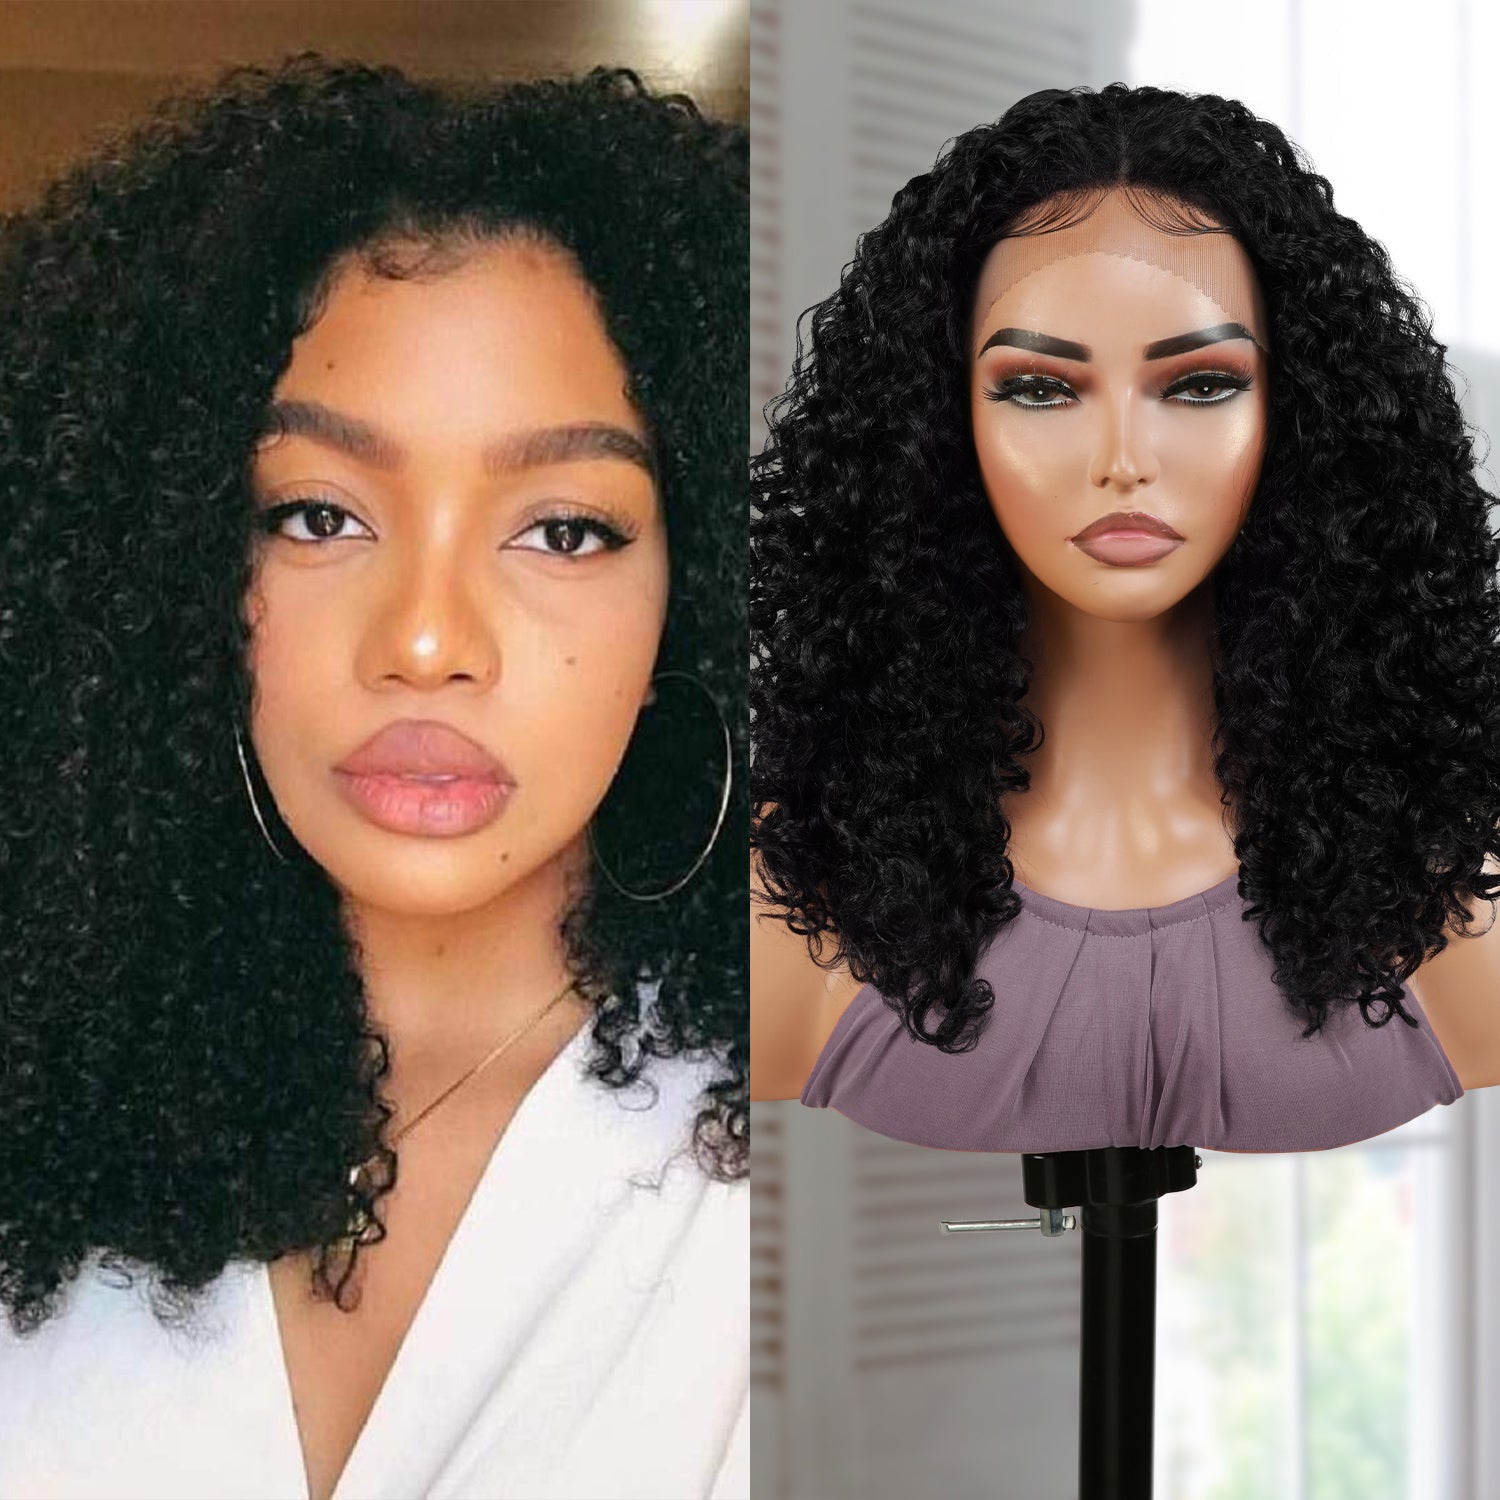  Introducing our medium curly bob deep wave T part Swiss lace front wig! Made with high-quality heat-resistant synthetic fibers, this wig features a natural-looking hairline with a deep part in the middle center. Perfect for black women, the T part design adds elegance, while the deep wave curly style adds volume and dimension. Easy to wear and style, this versatile wig is a must-have for any occasion. Shop now for ultimate style and versatility!